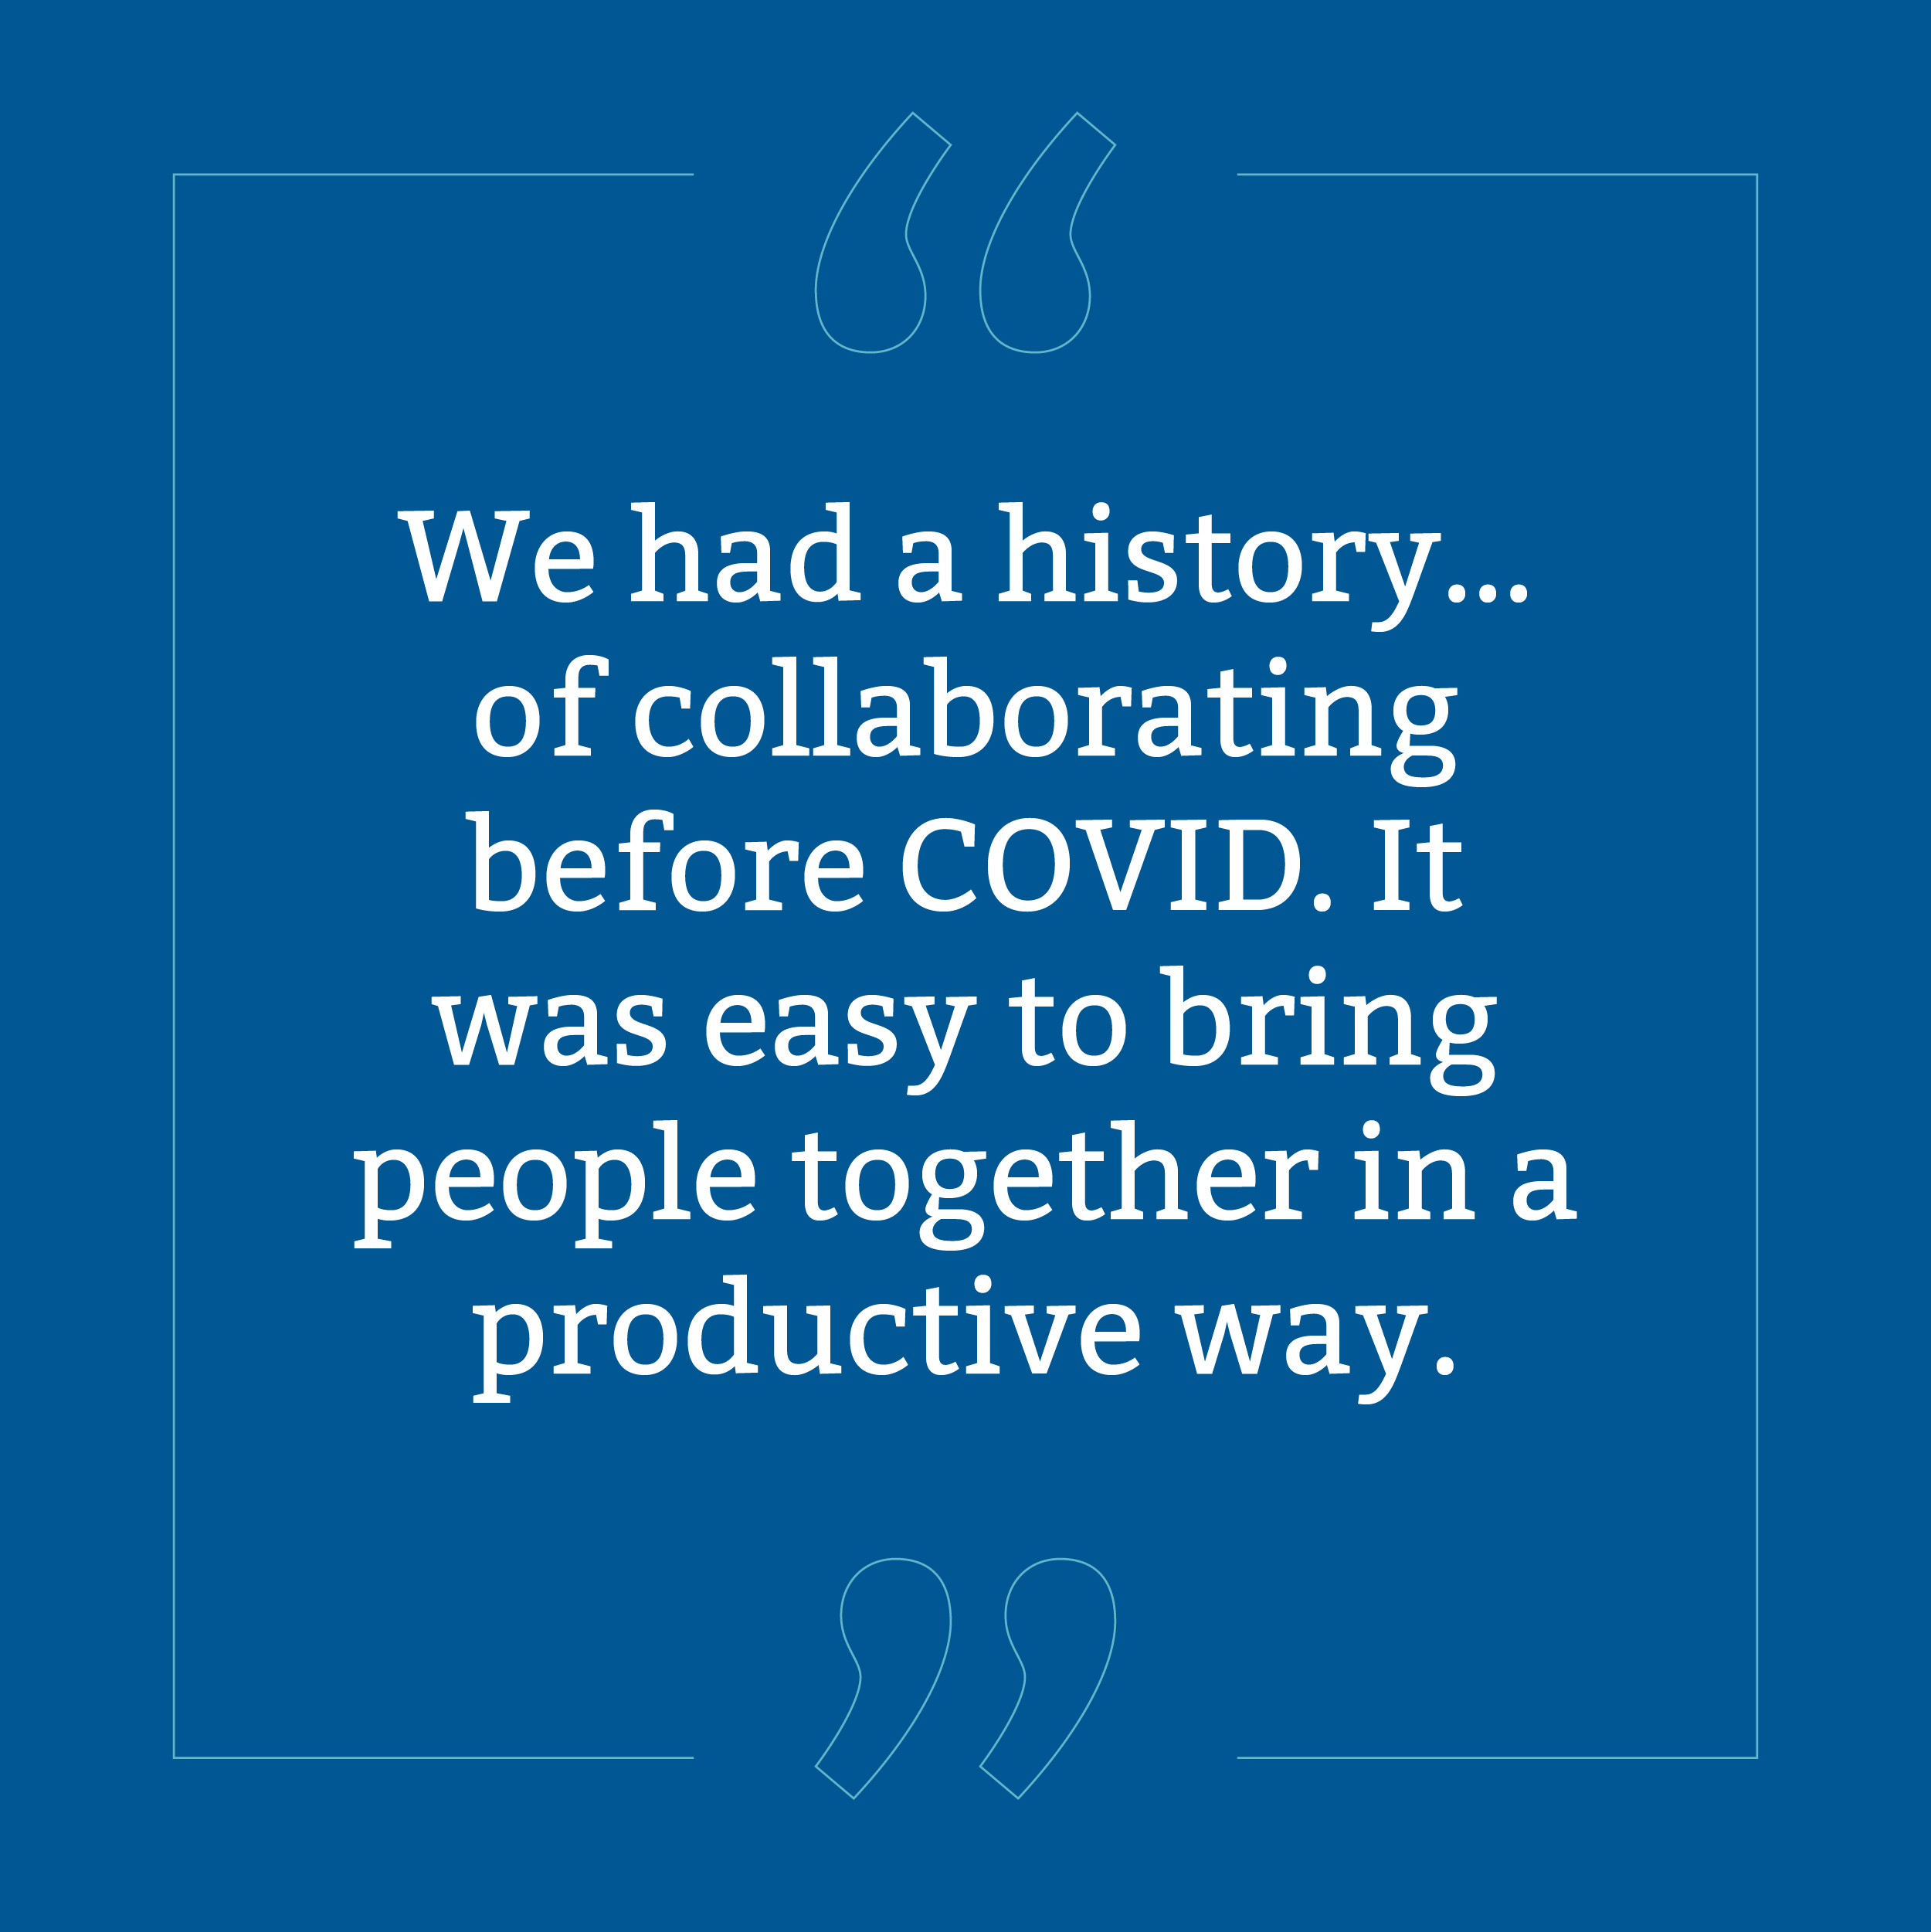 Quote, we had a history of collaborating before COVID. It was easy to bring them together in a productive way.